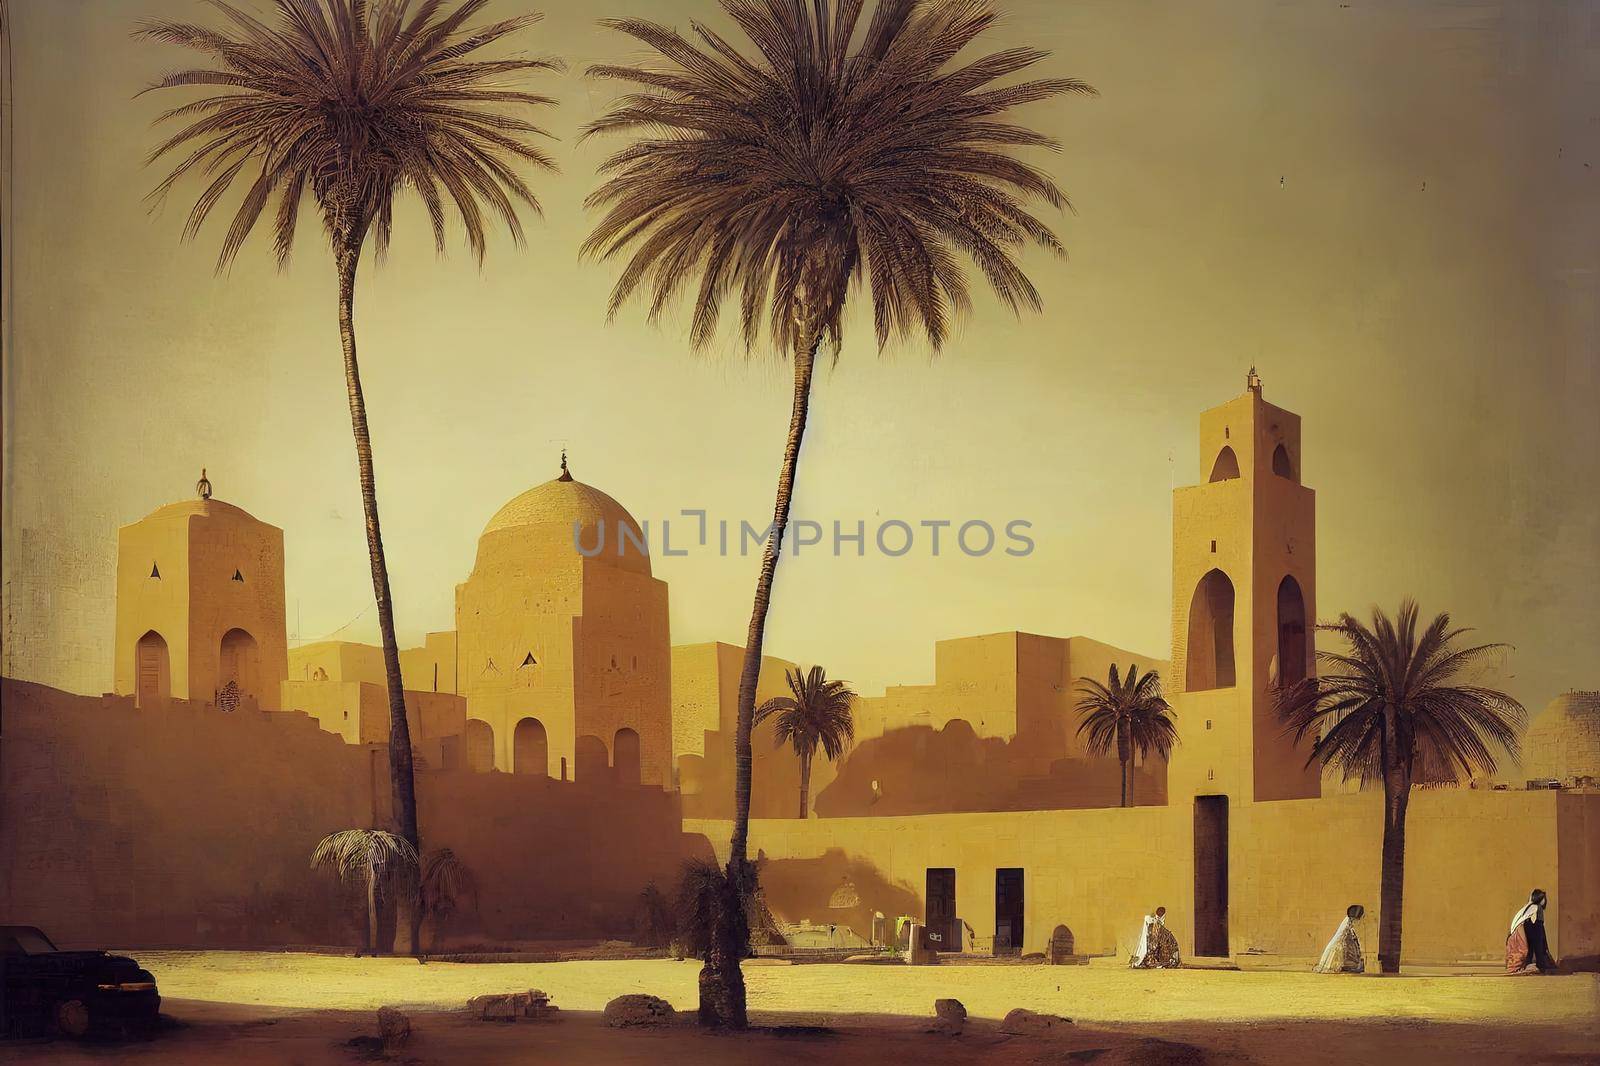 The city of Al Ahsa is located in eastern Saudi Arabia. It is characterized by palm trees and heritage sites